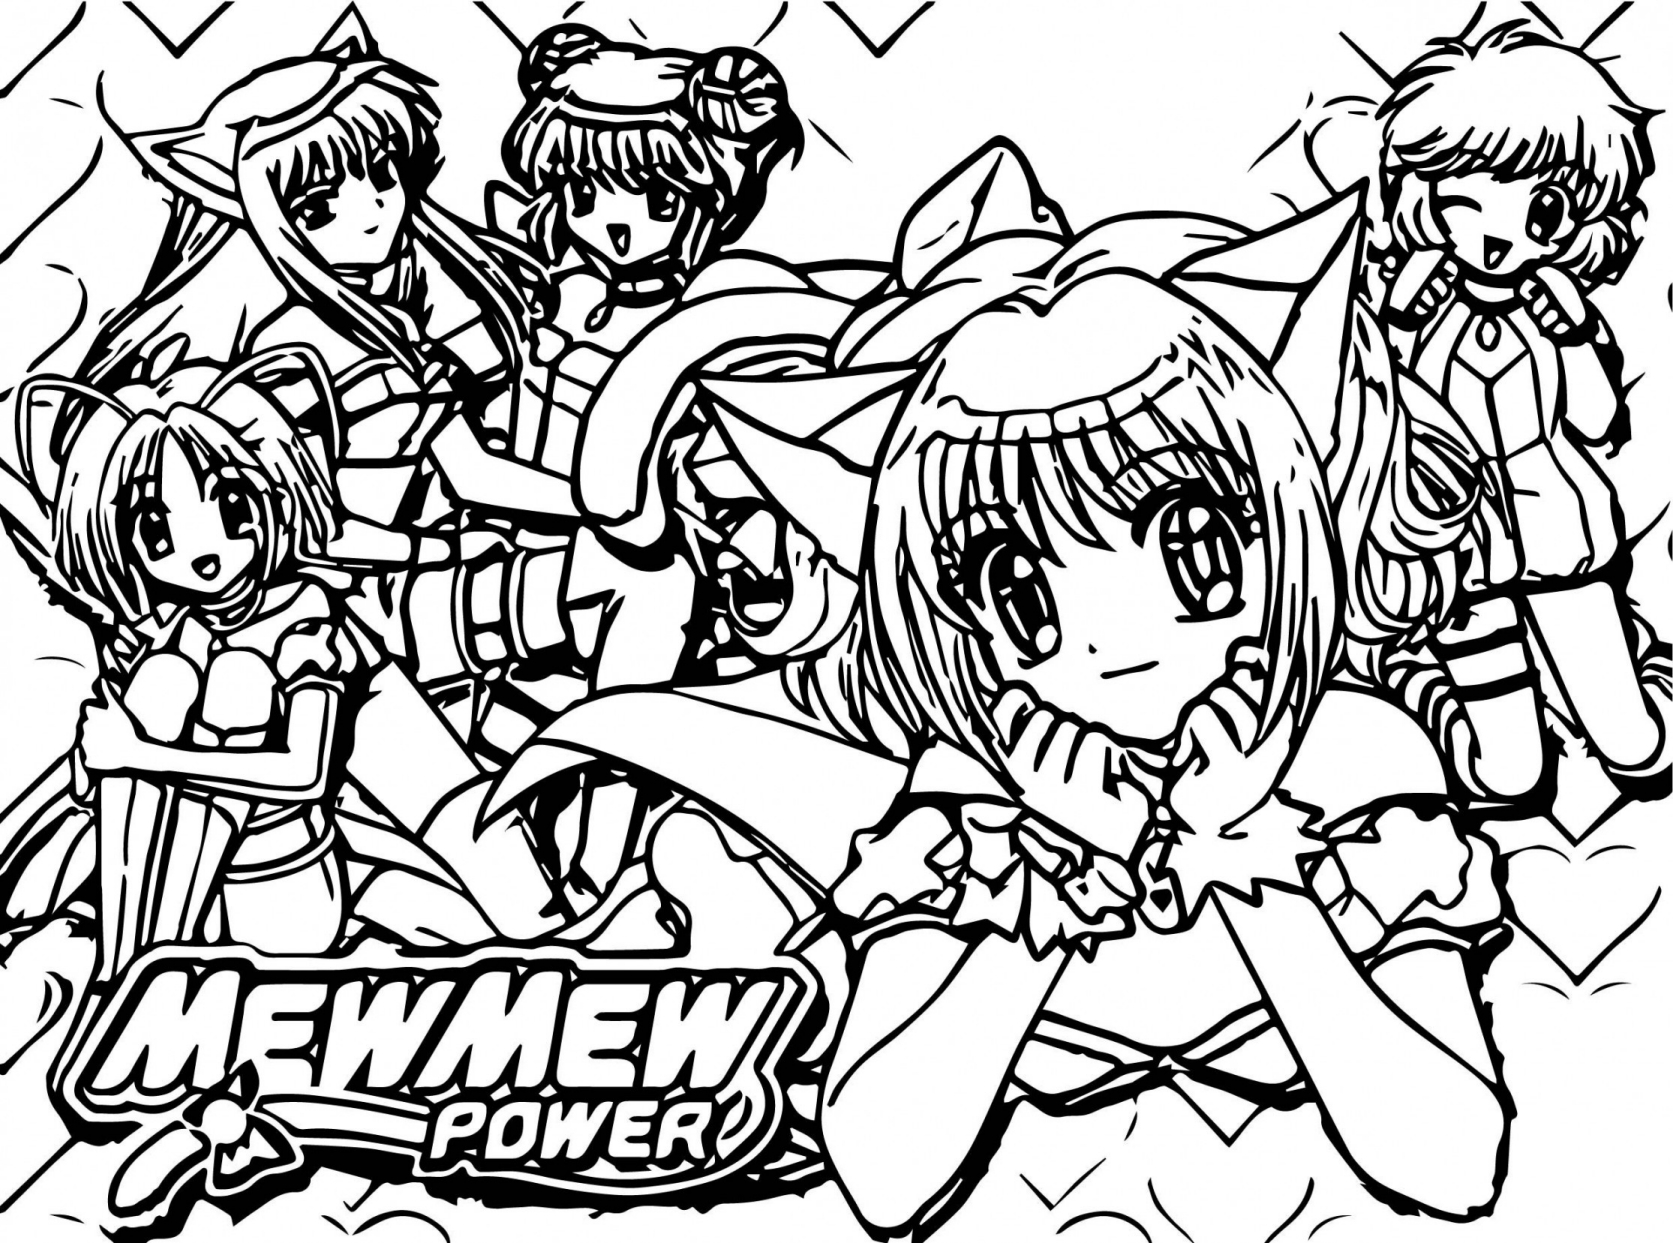 Glitter Force 6 coloring page to print and color